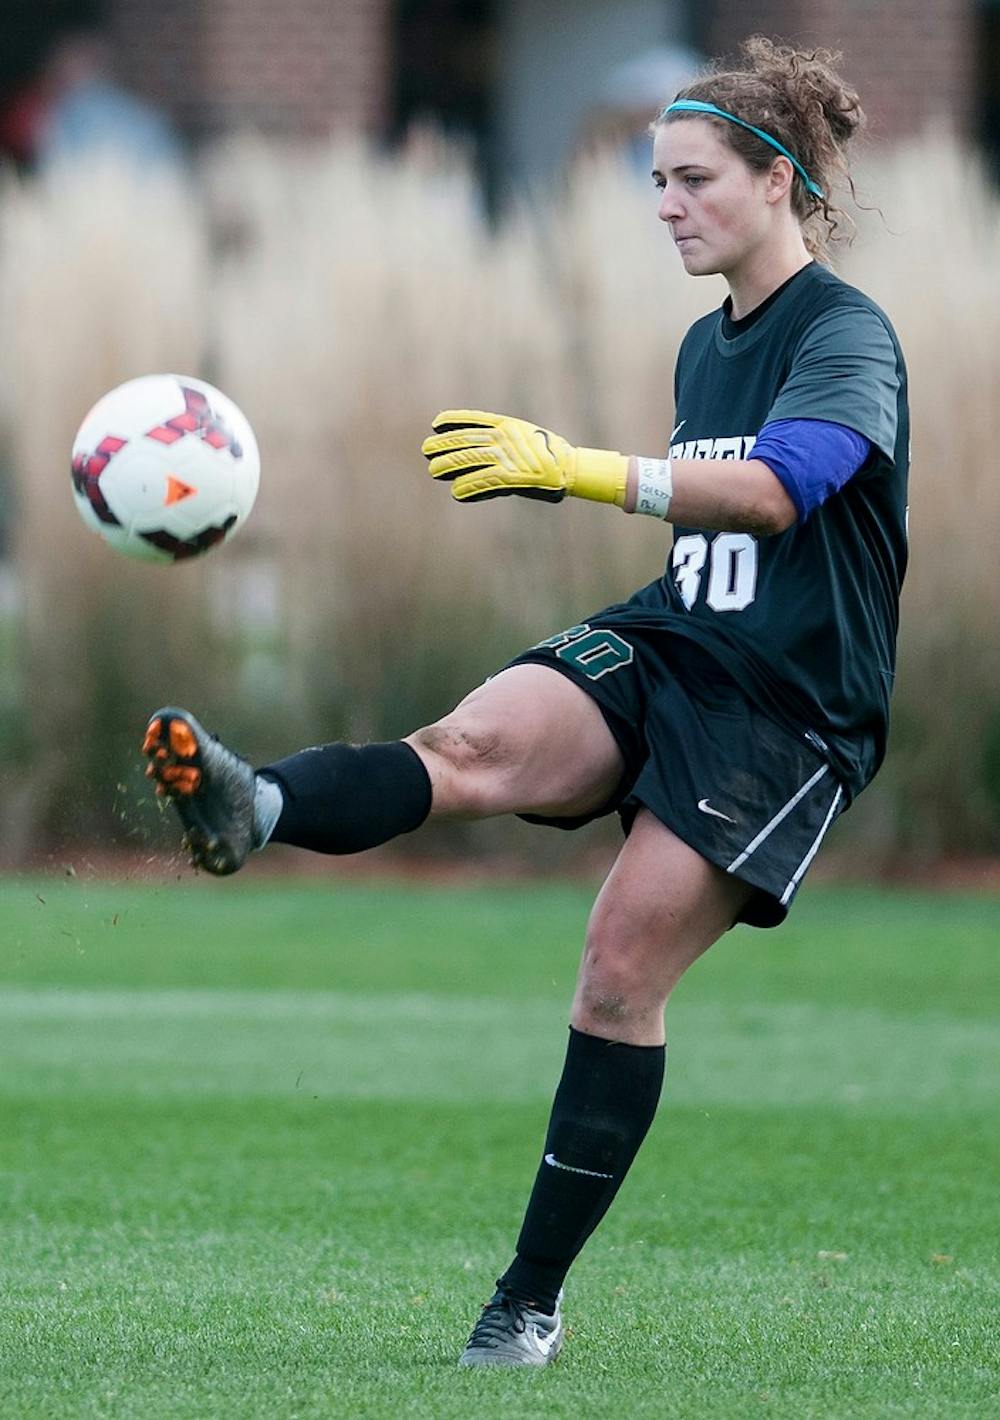 	<p>Sophomore goalkeeper Gabrielle Gauruder kicks the ball back onto the field Oct. 20, 2013 at DeMartin Stadium. <span class="caps">MSU</span> lost to Indiana 2-3. Margaux Forster/The State News</p>